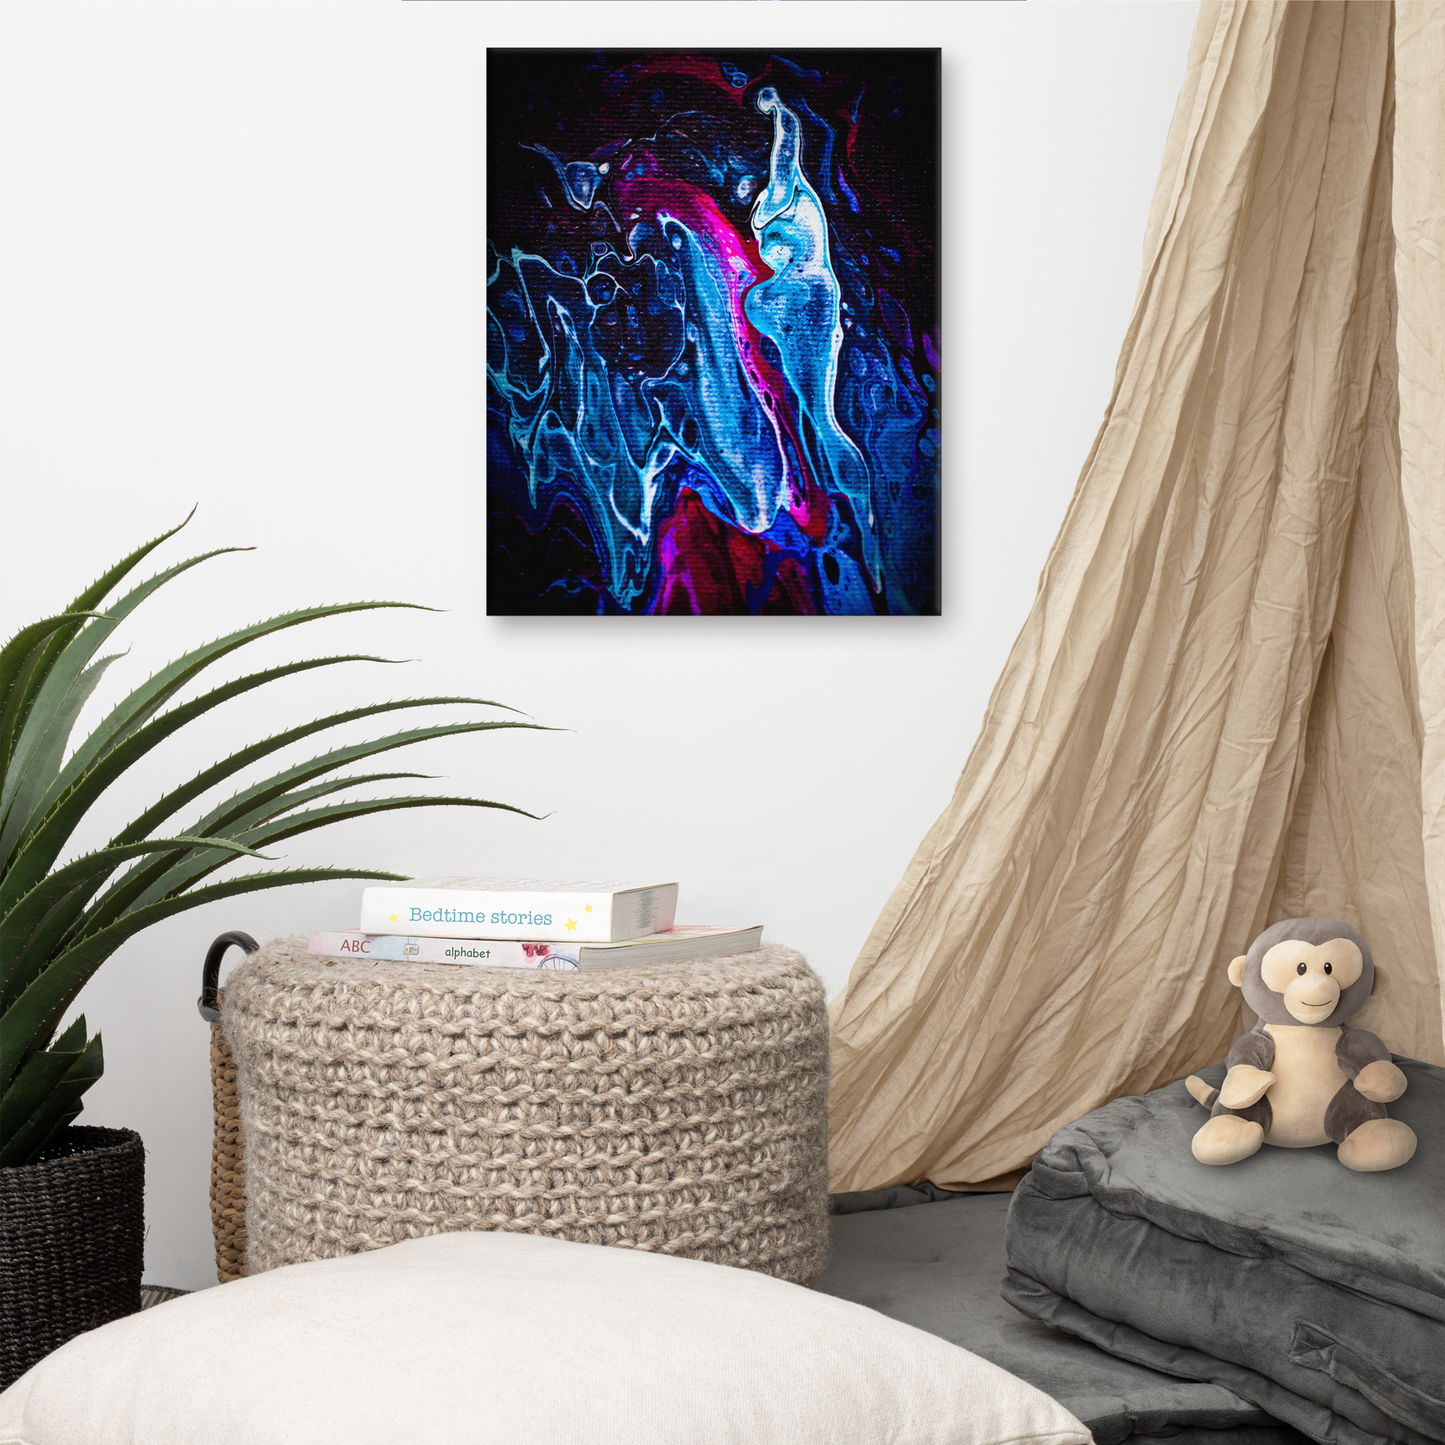 NightOwl Studio Abstract Wall Art, Blue Liquid, Boho Living Room, Bedroom, Office, and Home Decor, Premium Canvas with Wooden Frame, Acrylic Painting Reproduction, 16” x 20”